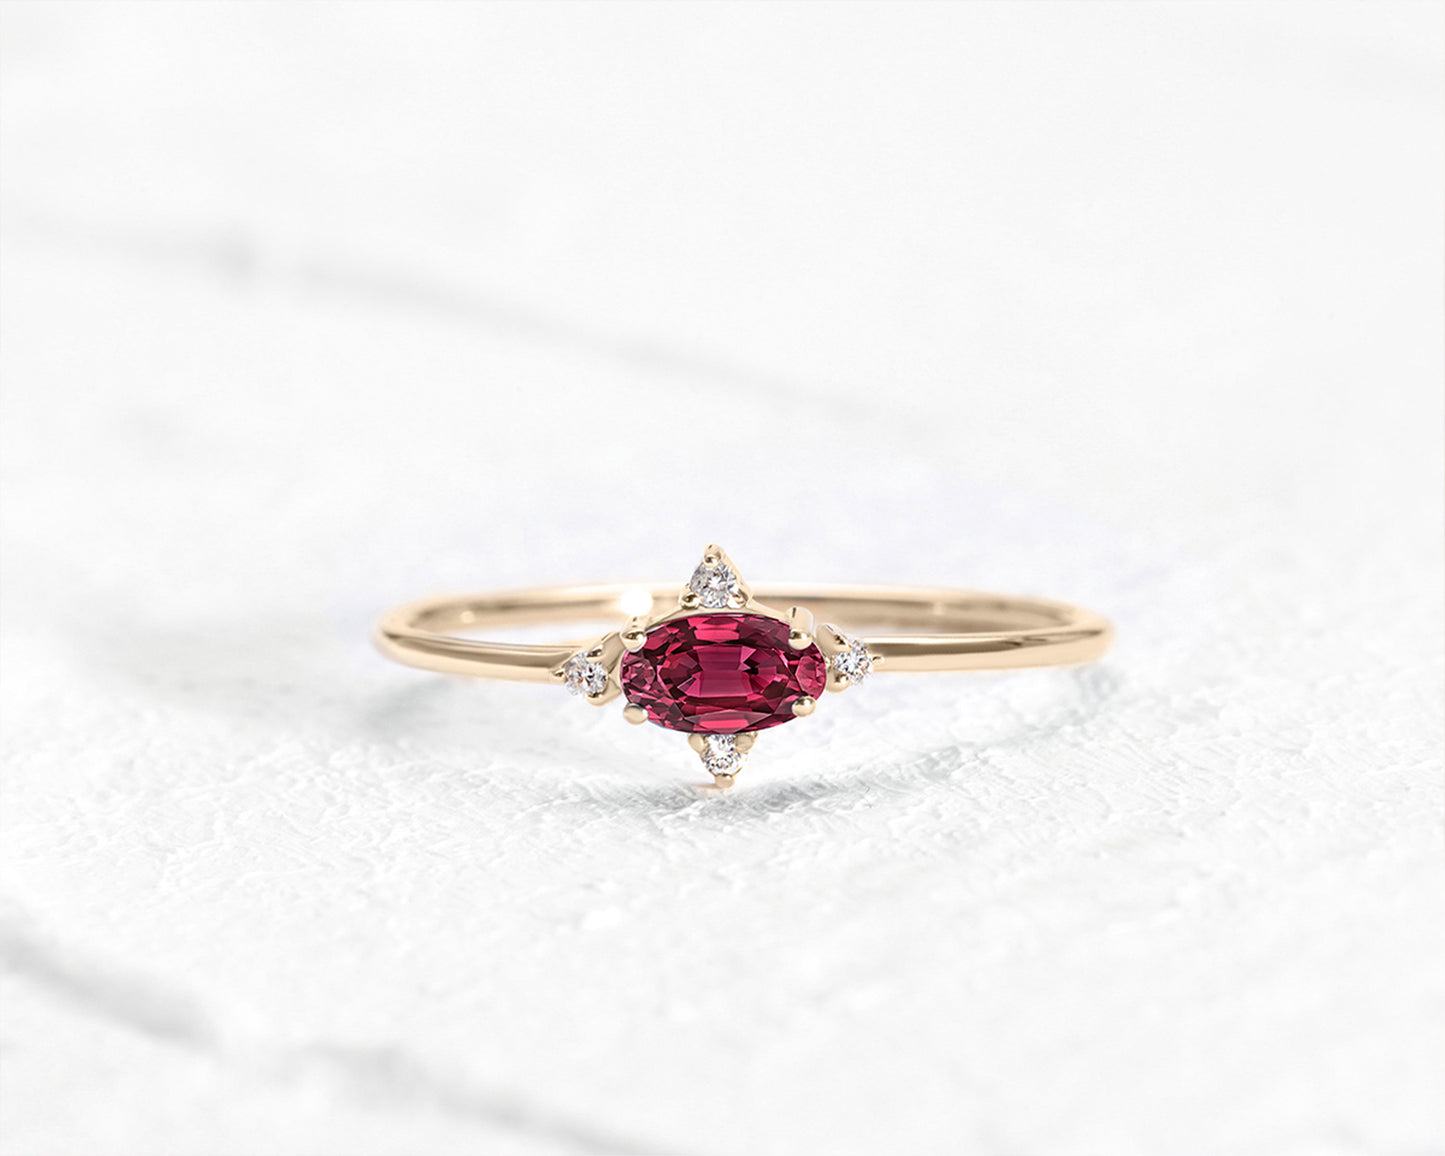 Halo Setting Oval cut Ruby with Diamond Ring in 14K Yellow Solid Gold,Straight Shank Engagement Ring